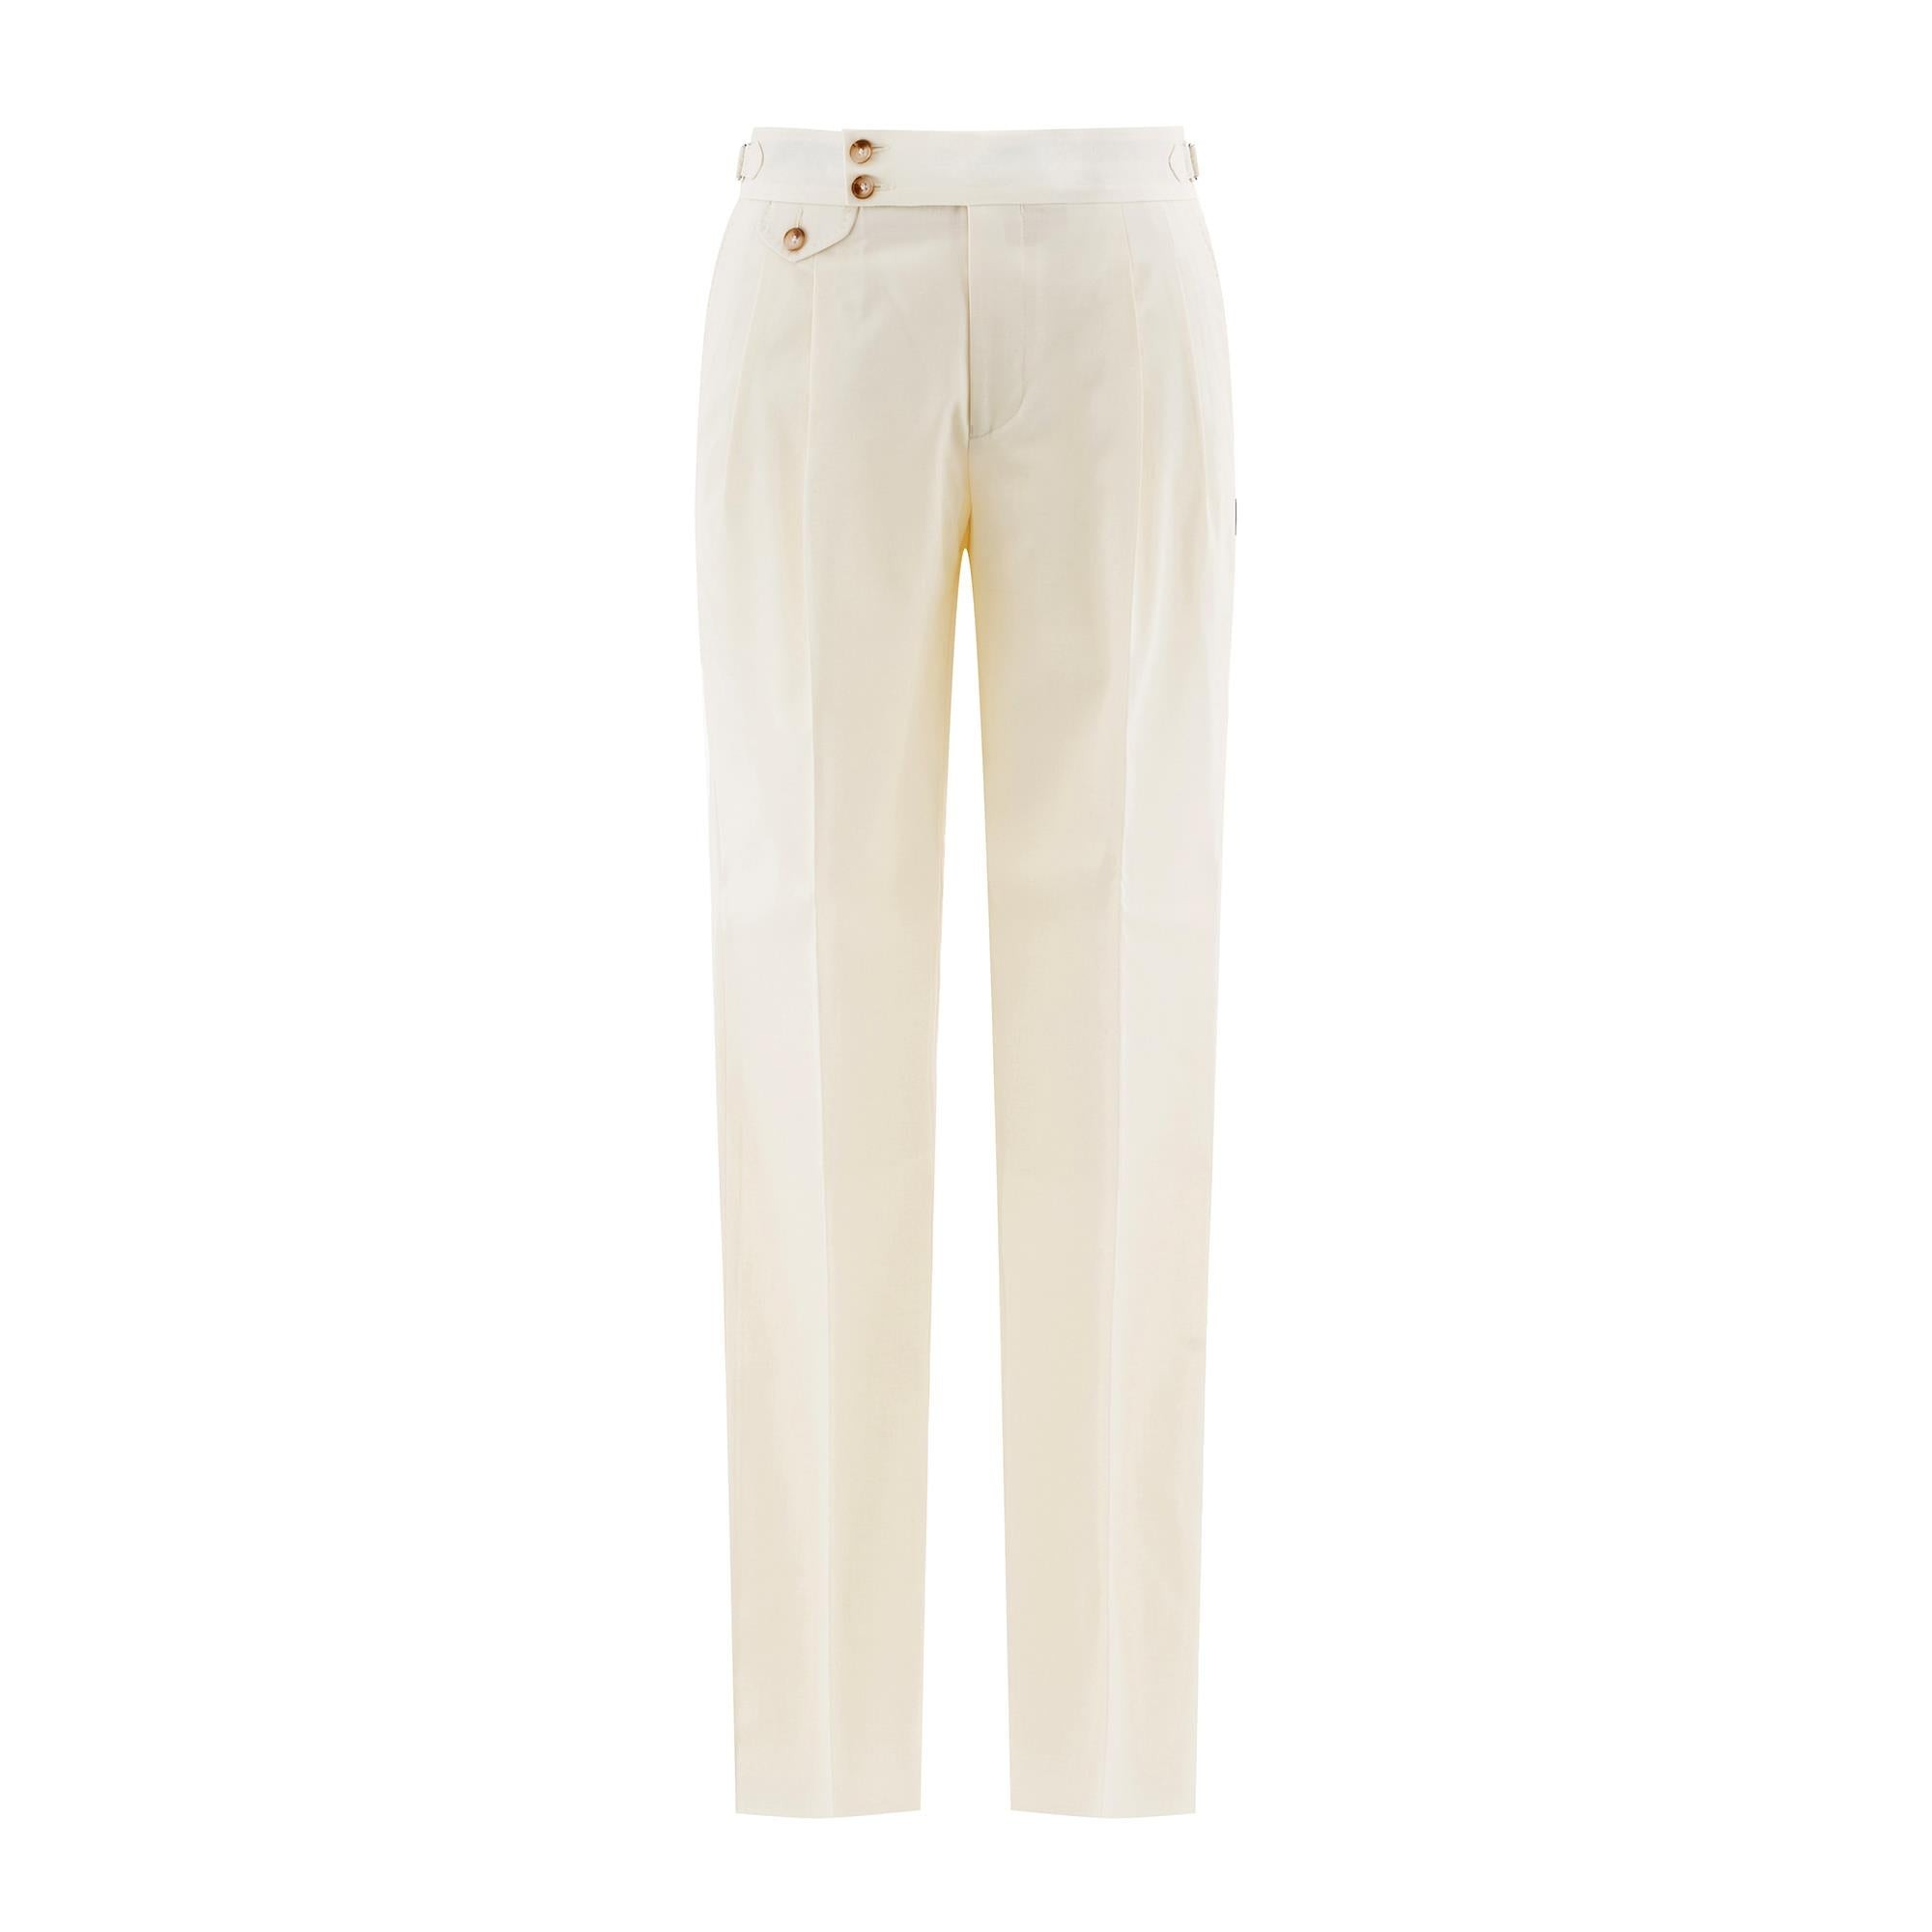 GALA OFF-WHITE TROUSERS